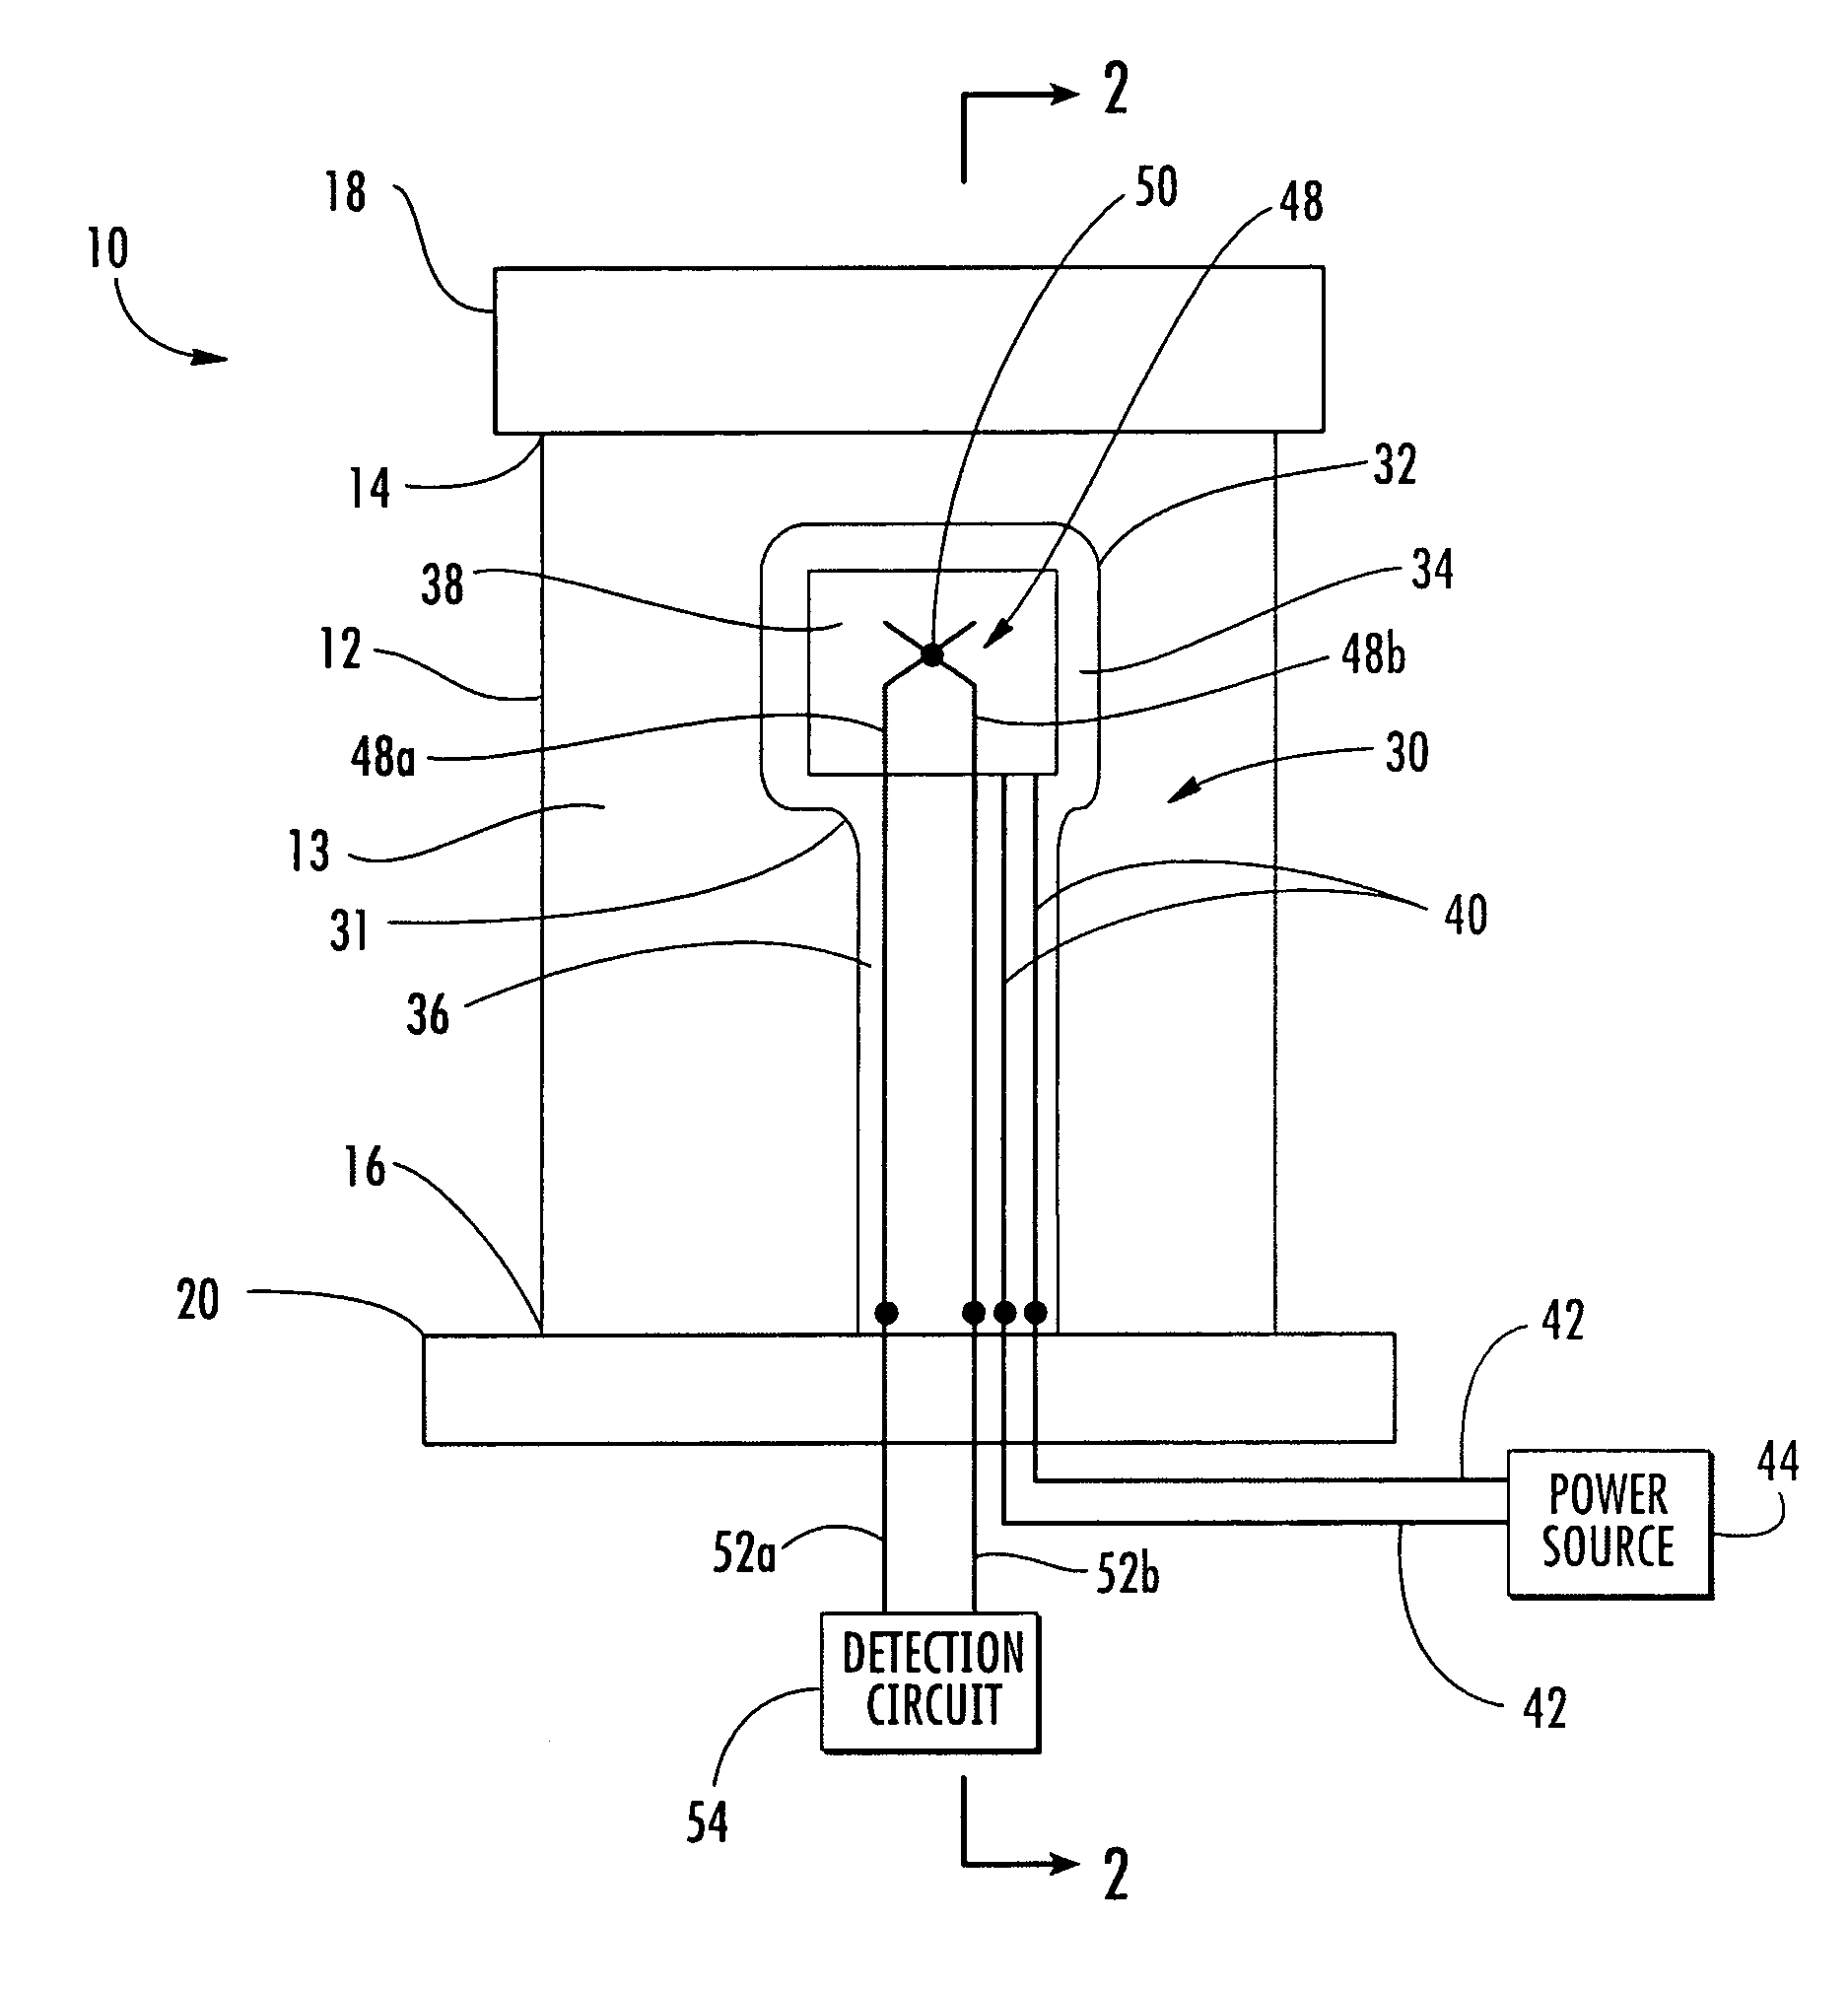 Compressor airfoil surface wetting and icing detection system